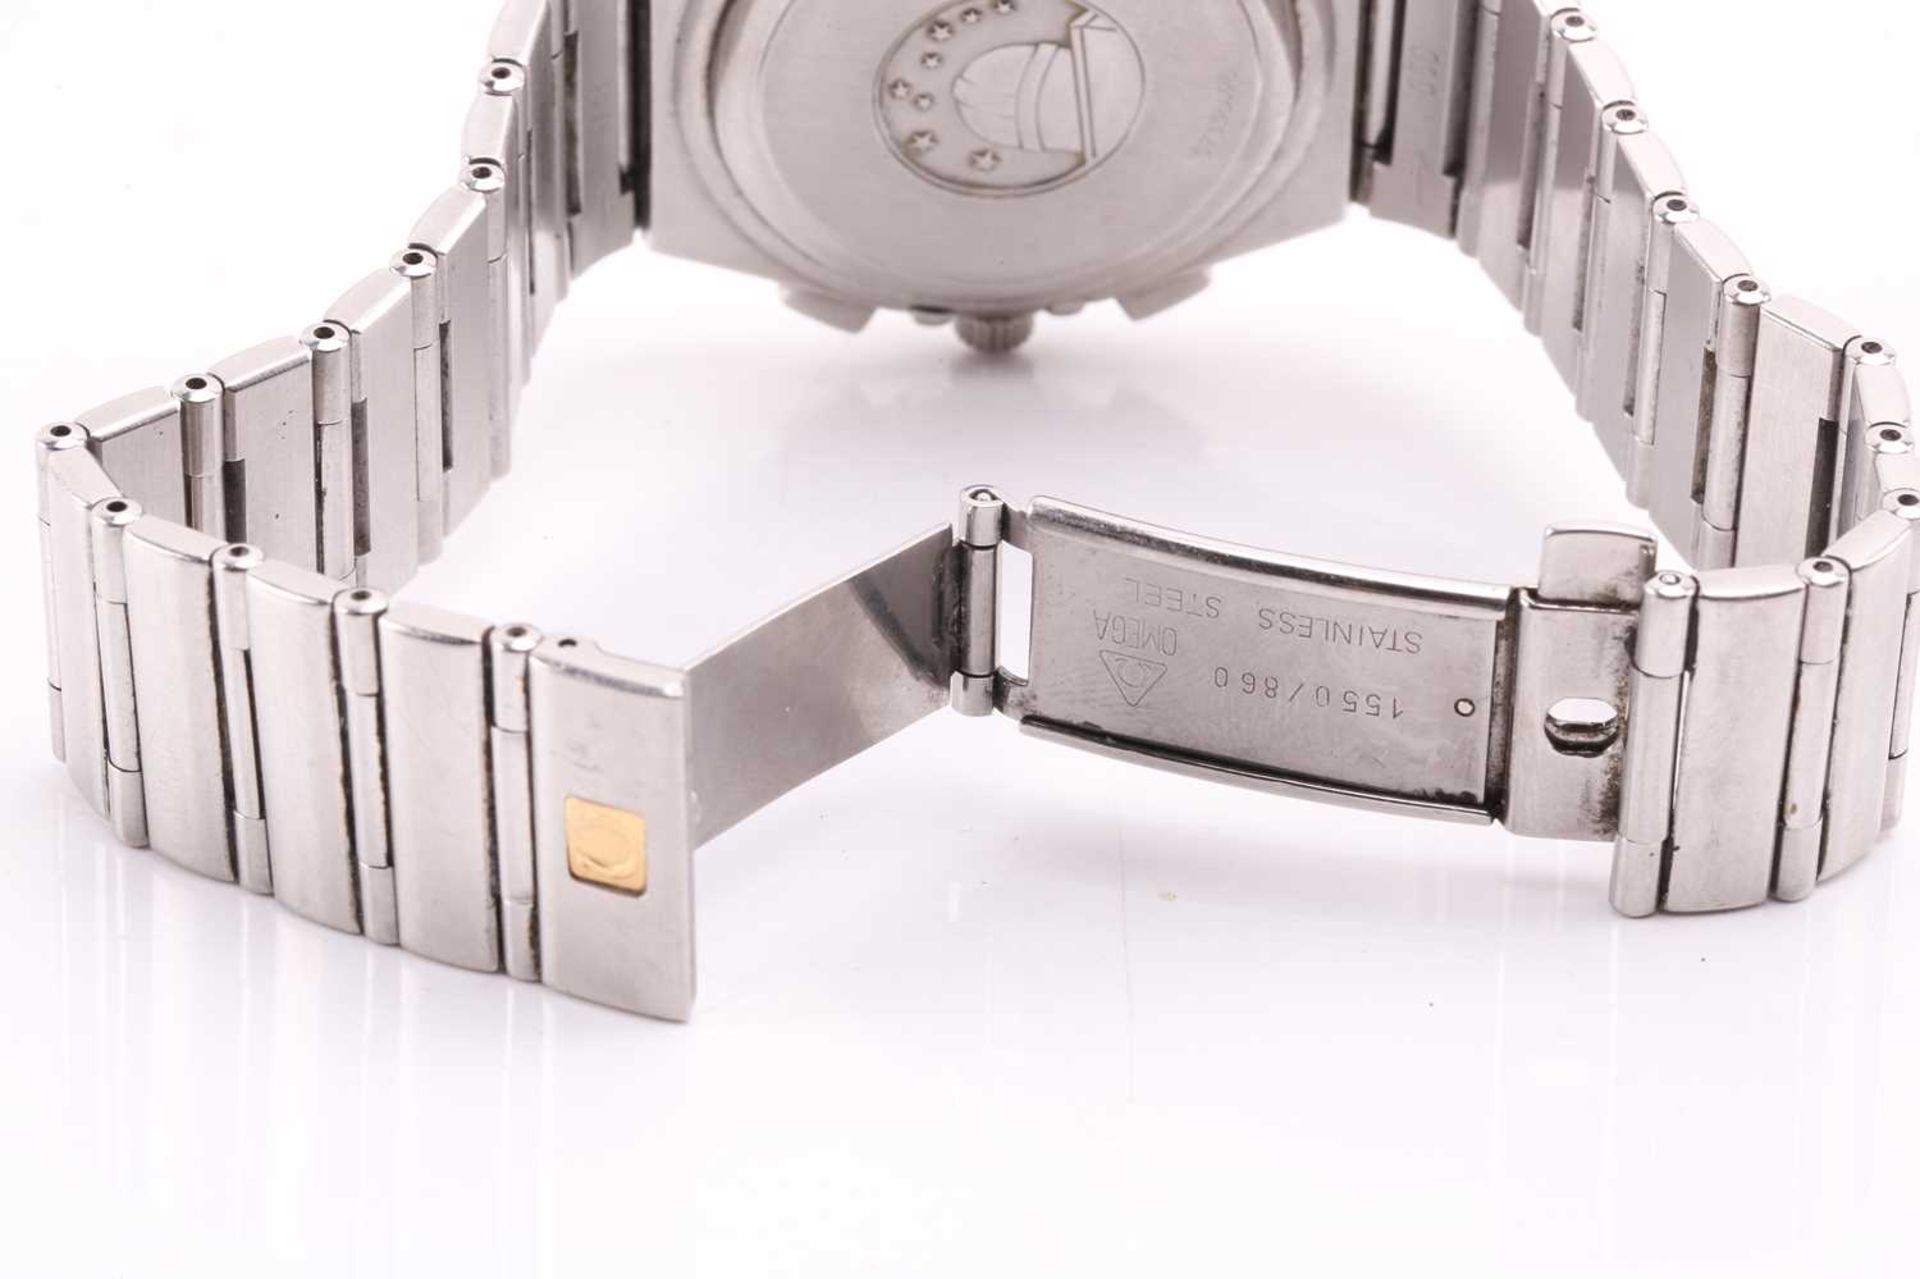 An Omega Constellation chronograph watch, featuring a Swiss-made quartz movement calibre: 1270 in - Image 5 of 8